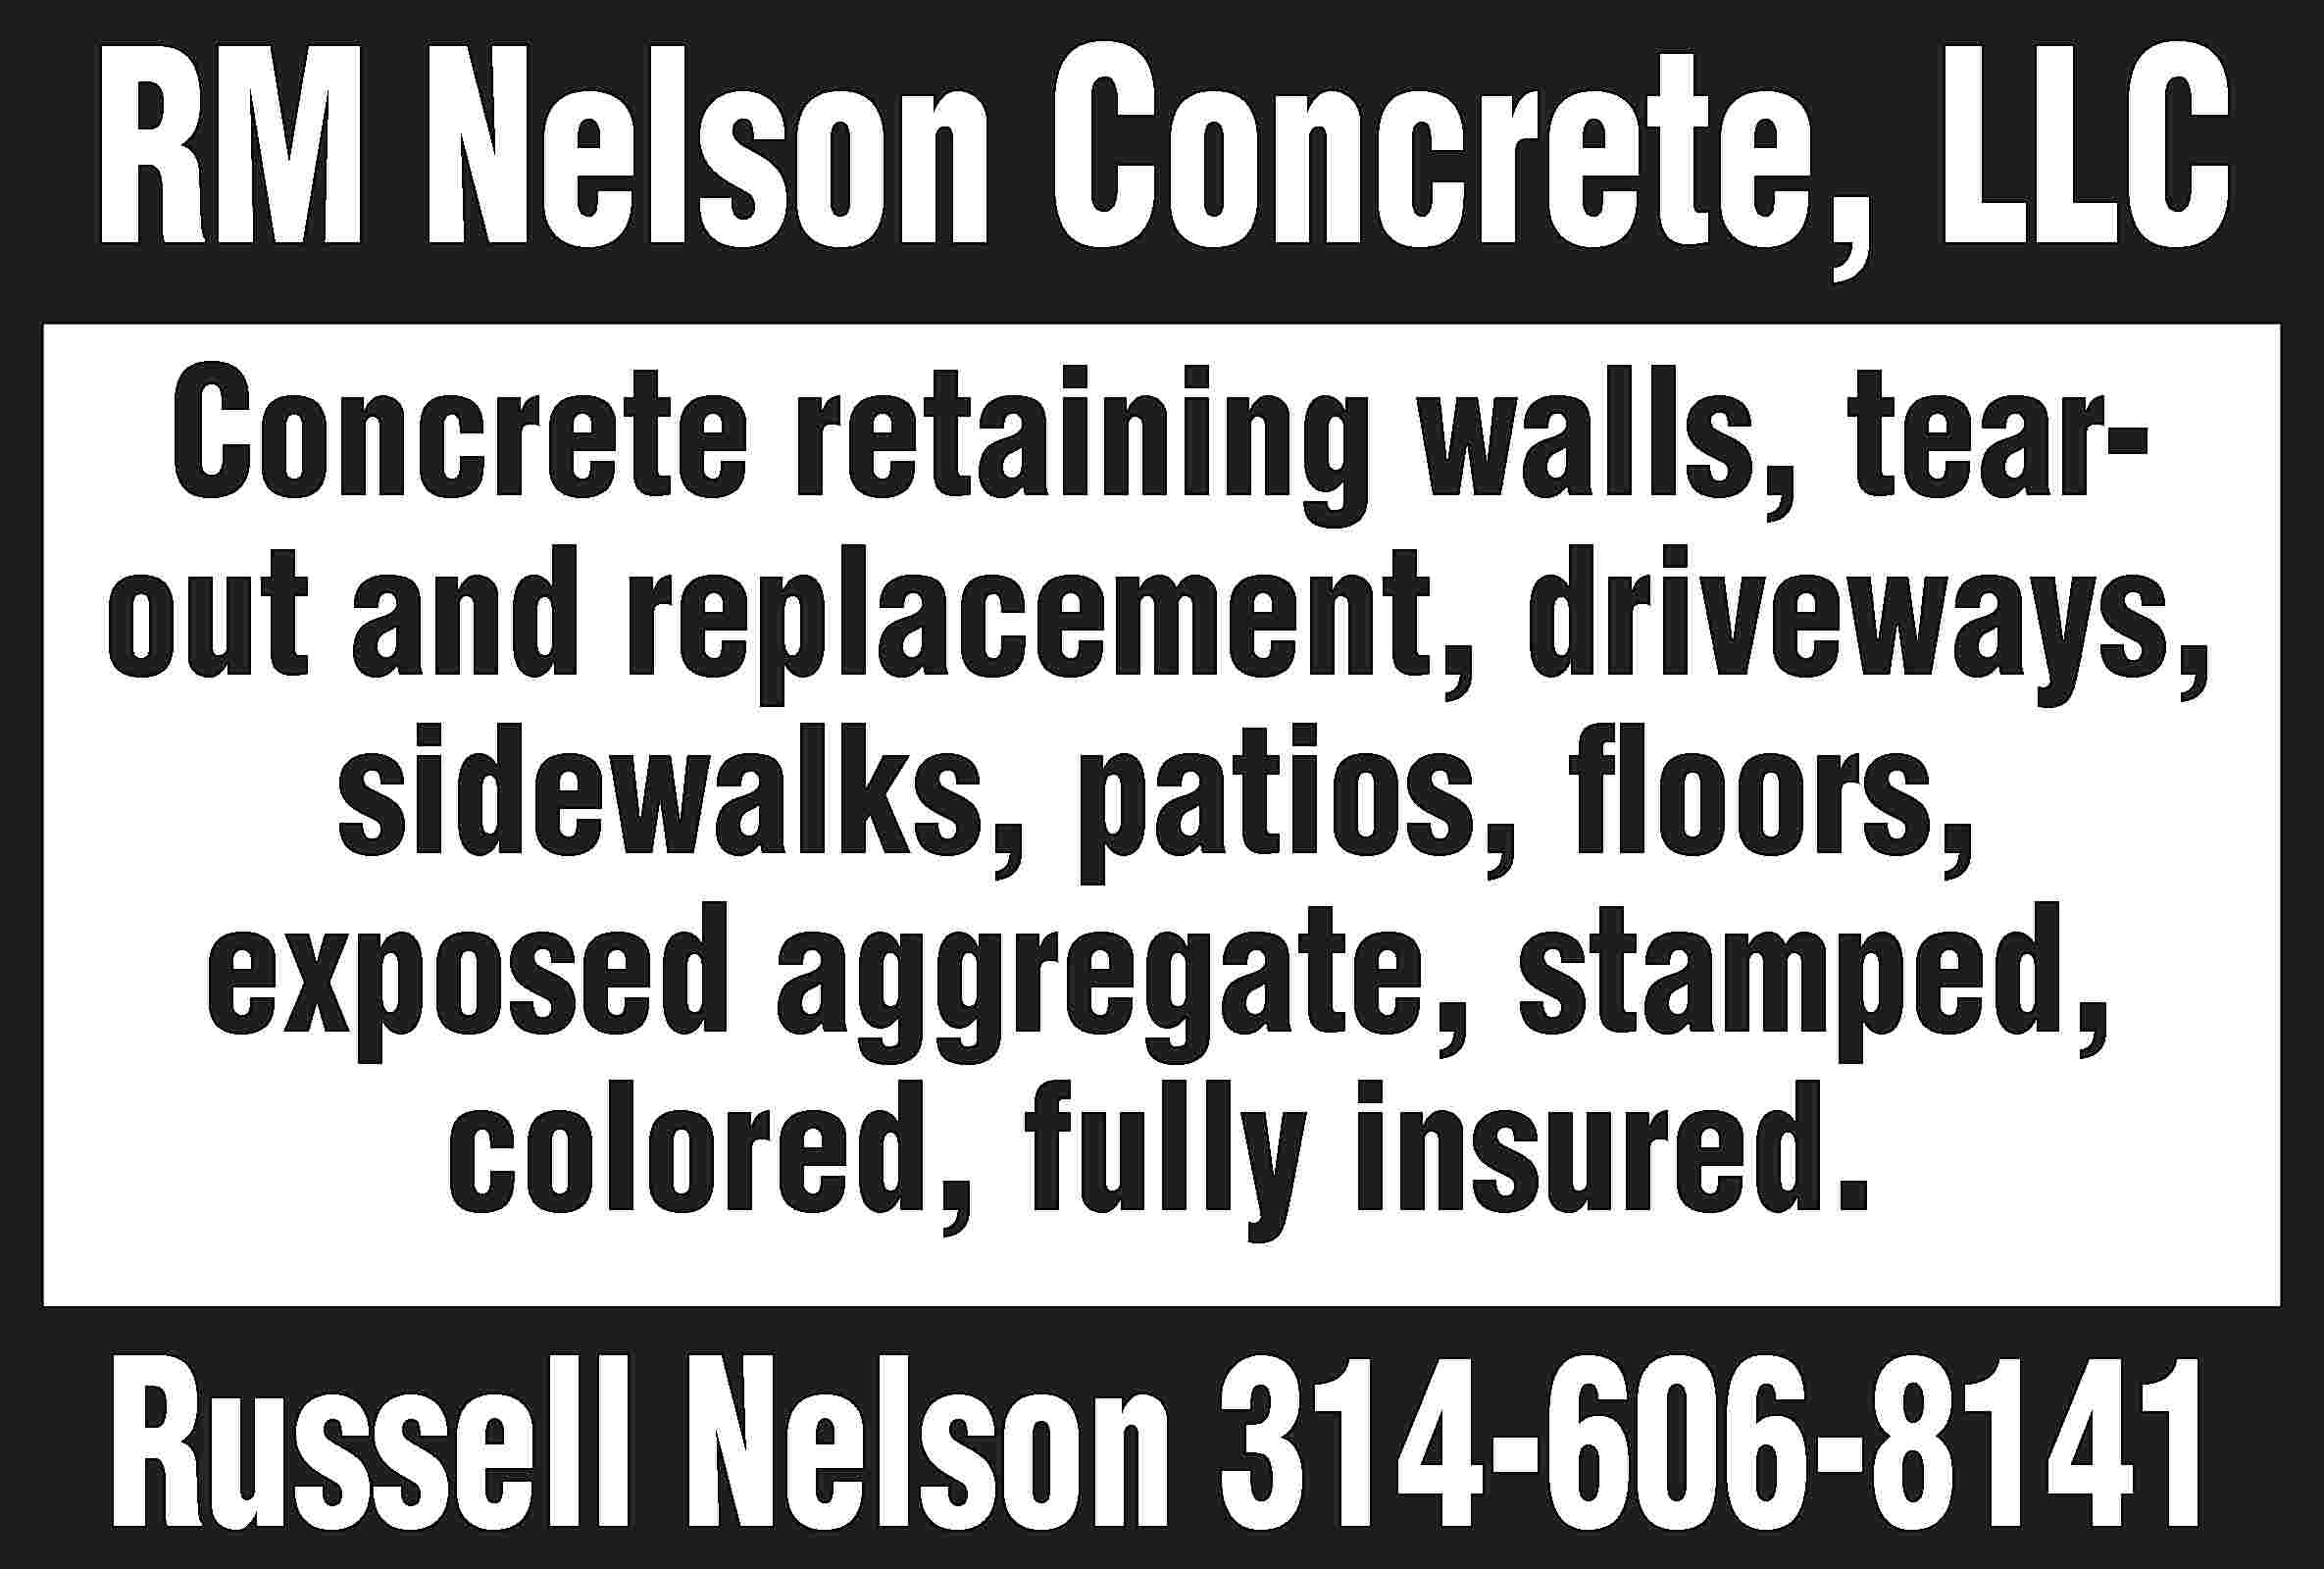 RM Nelson Concrete, LLC Concrete  RM Nelson Concrete, LLC Concrete retaining walls, tearout and replacement, driveways, sidewalks, patios, floors, exposed aggregate, stamped, colored, fully insured. Russell Nelson 314-606-8141